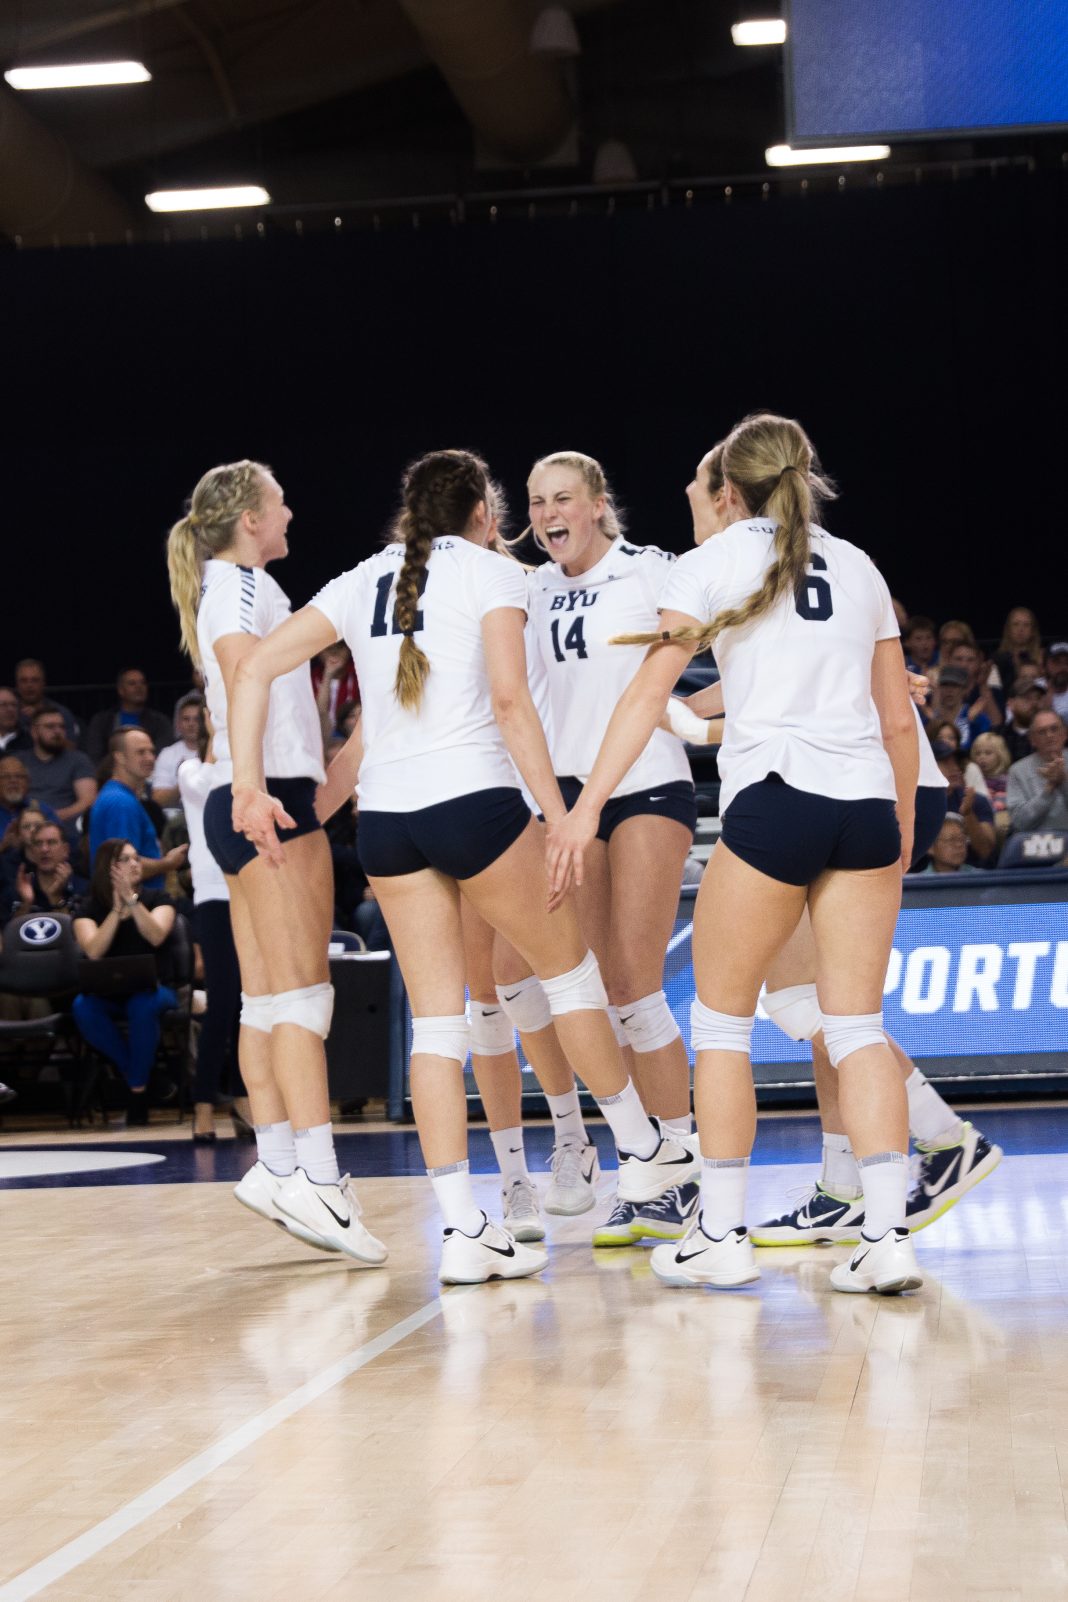 Byu Womens Volleyball Sweet 16 For Lucky No 13 The Daily Universe 3116